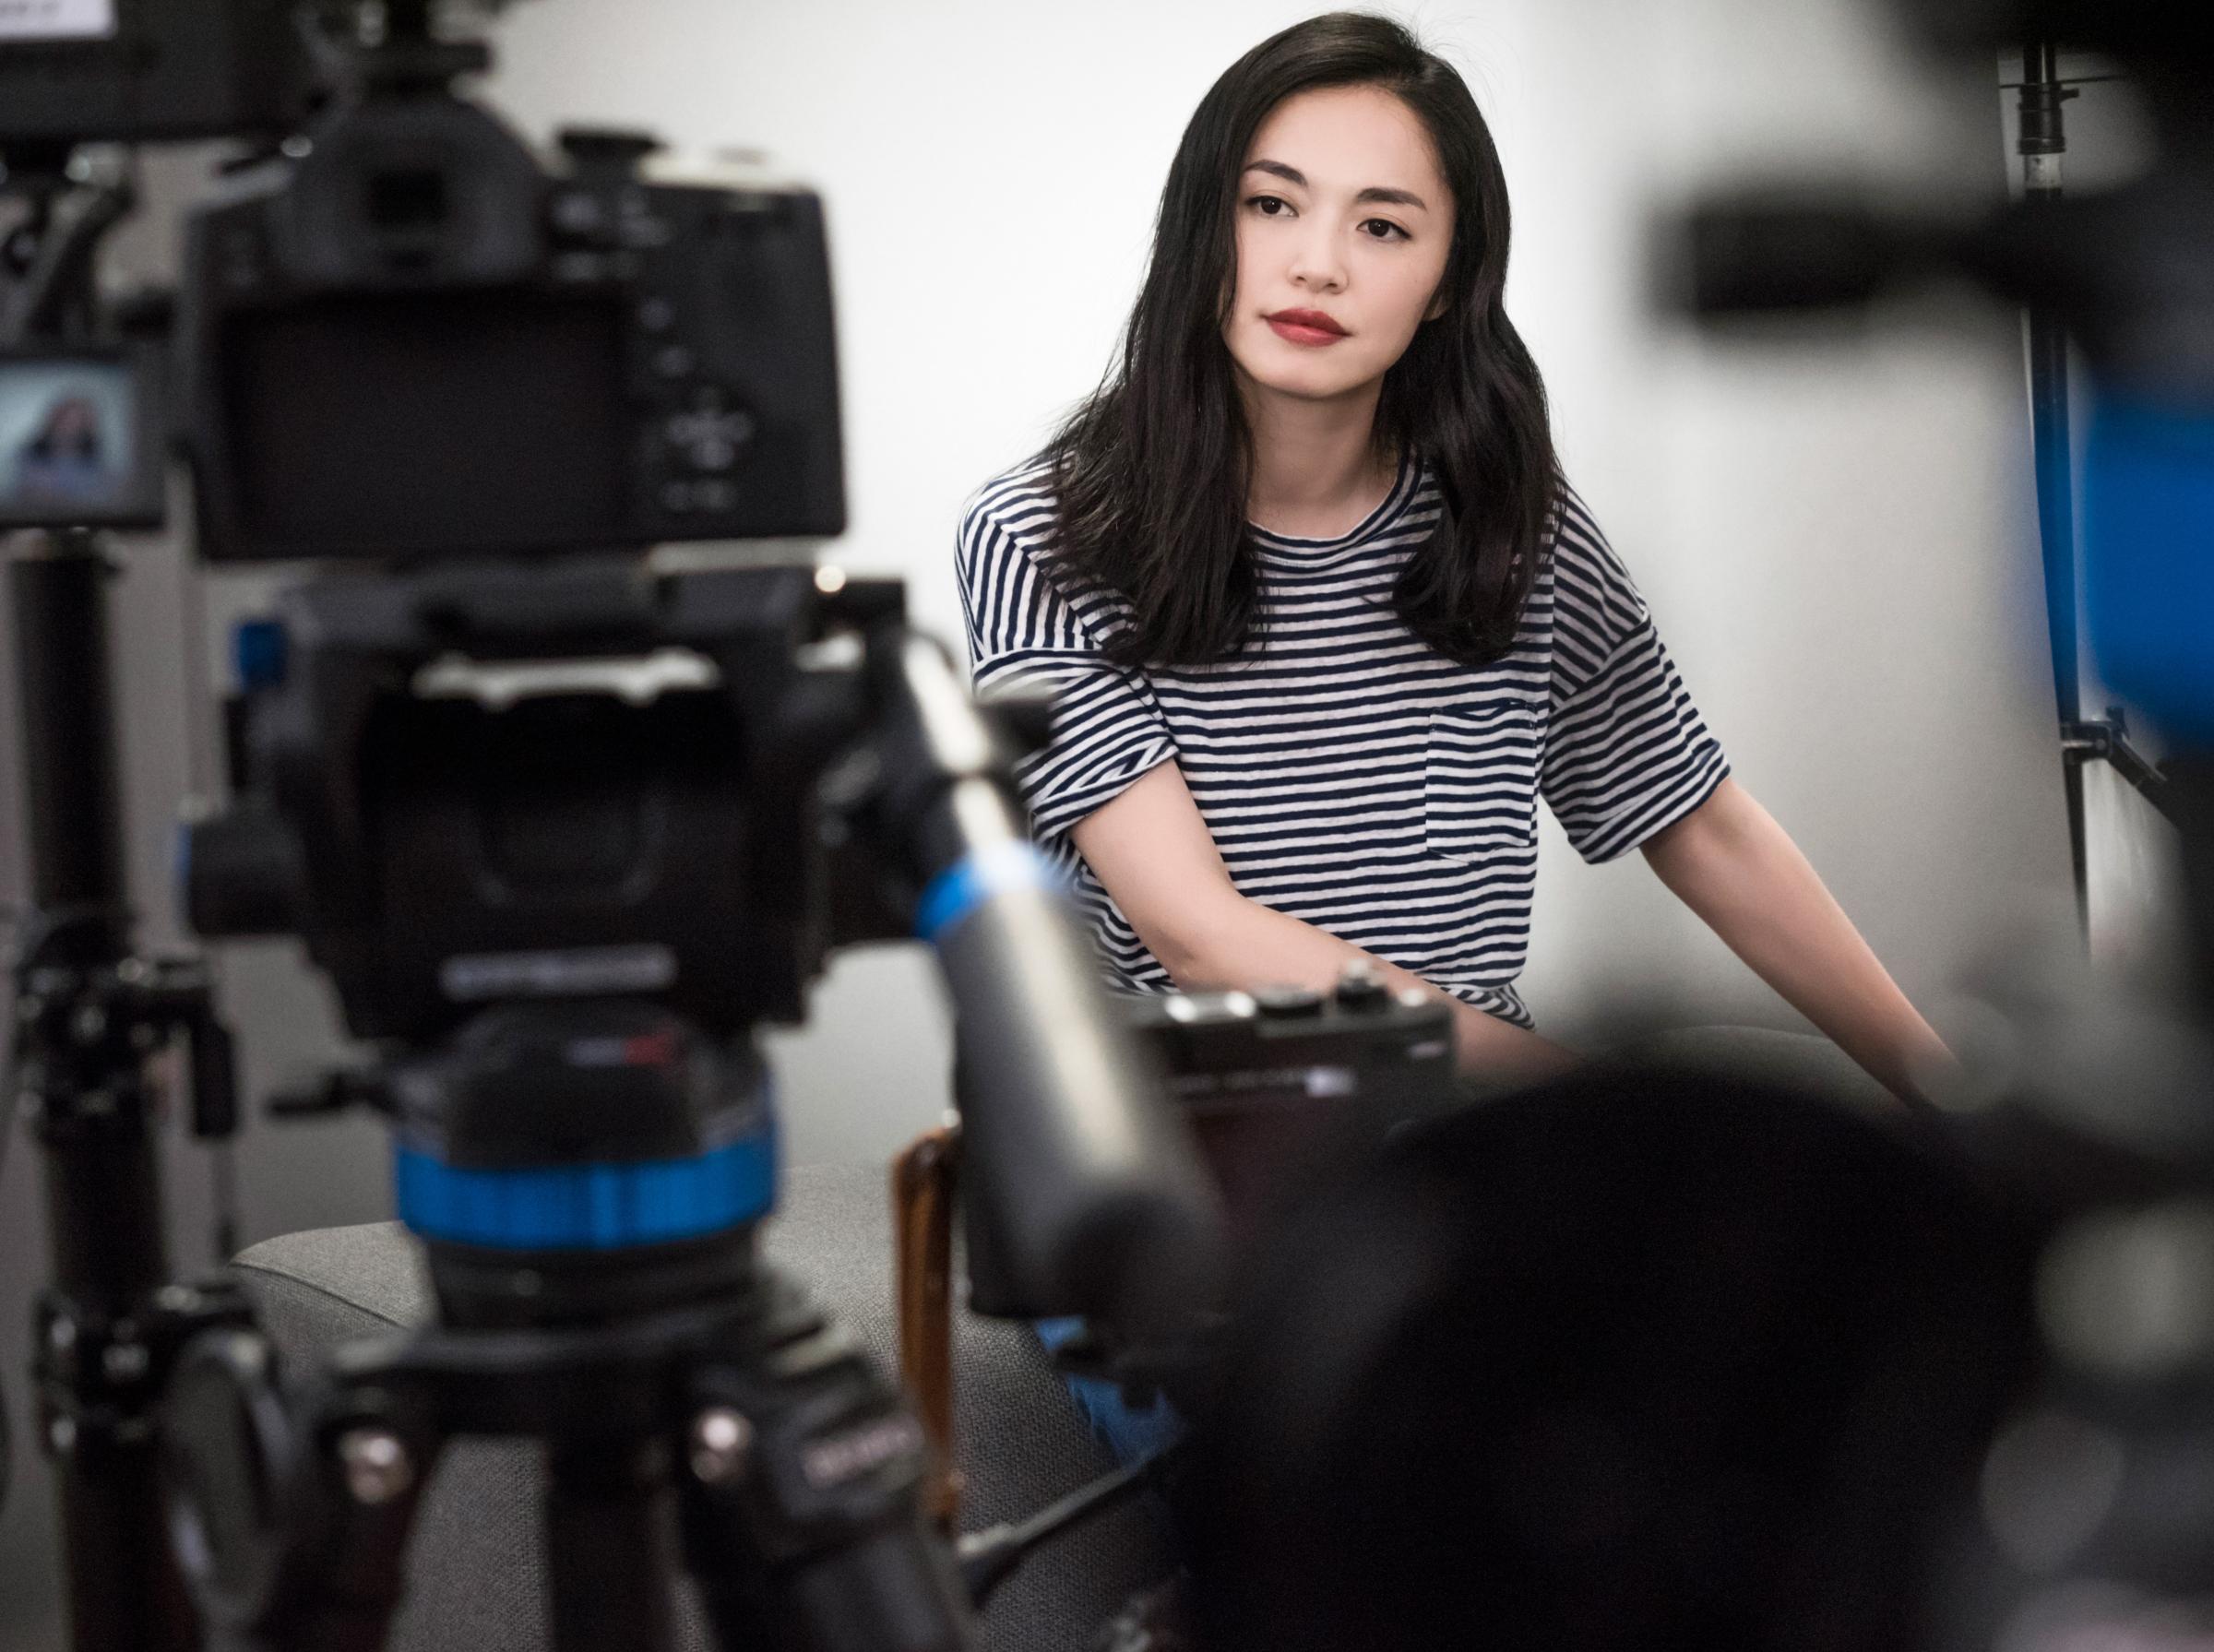 Yao Chen behind the scenes for the 2016 Pirelli Calendar shoot.